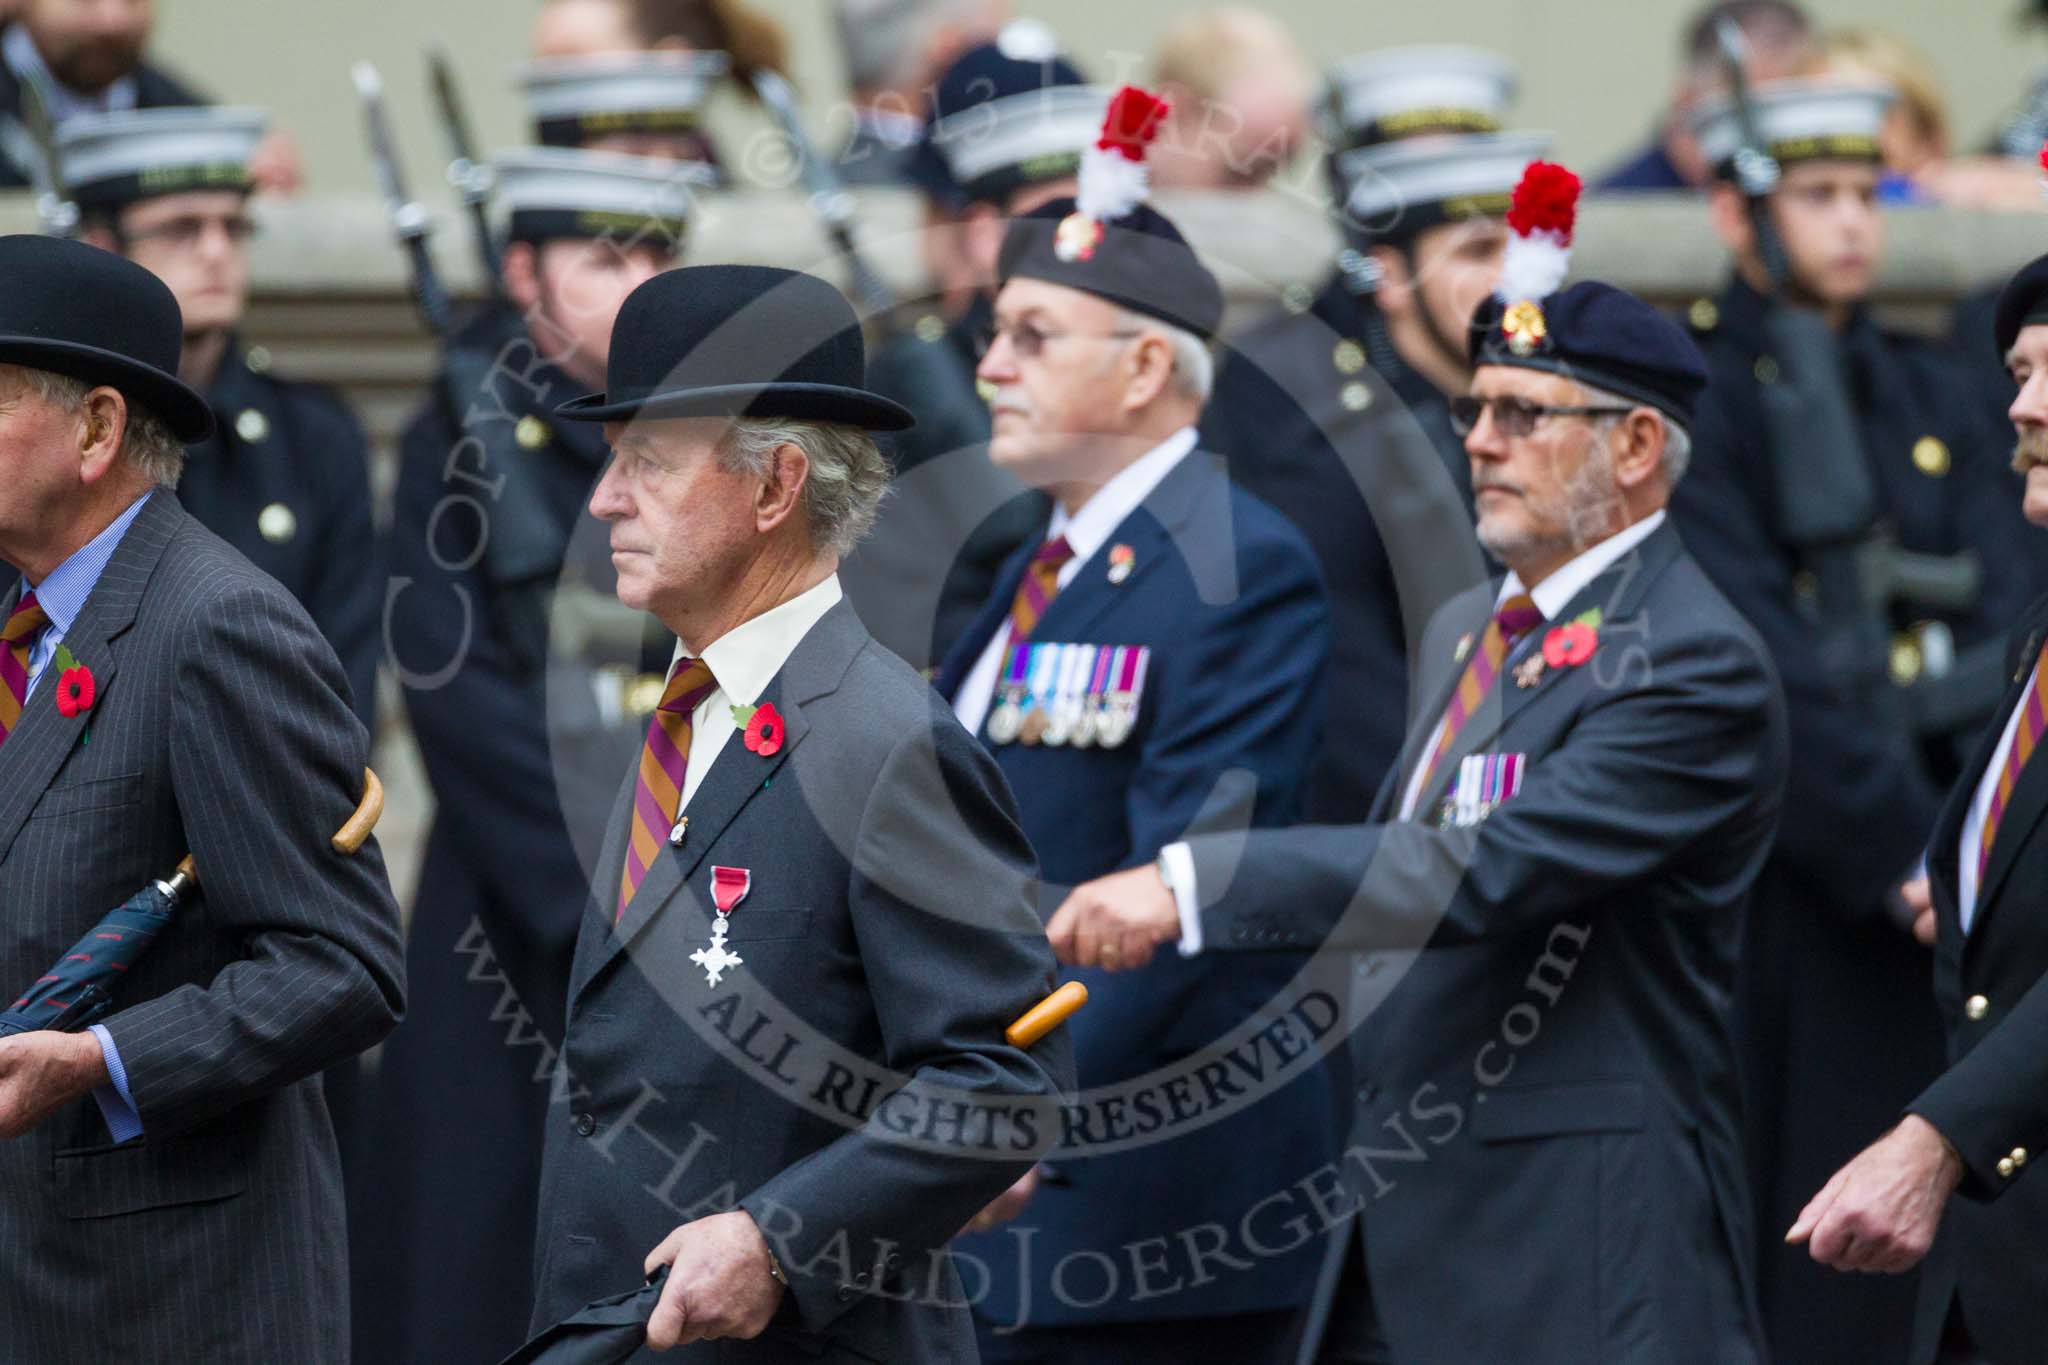 Remembrance Sunday at the Cenotaph 2015: Group A19, The Royal Hampshire Regimental Club.
Cenotaph, Whitehall, London SW1,
London,
Greater London,
United Kingdom,
on 08 November 2015 at 12:12, image #1322